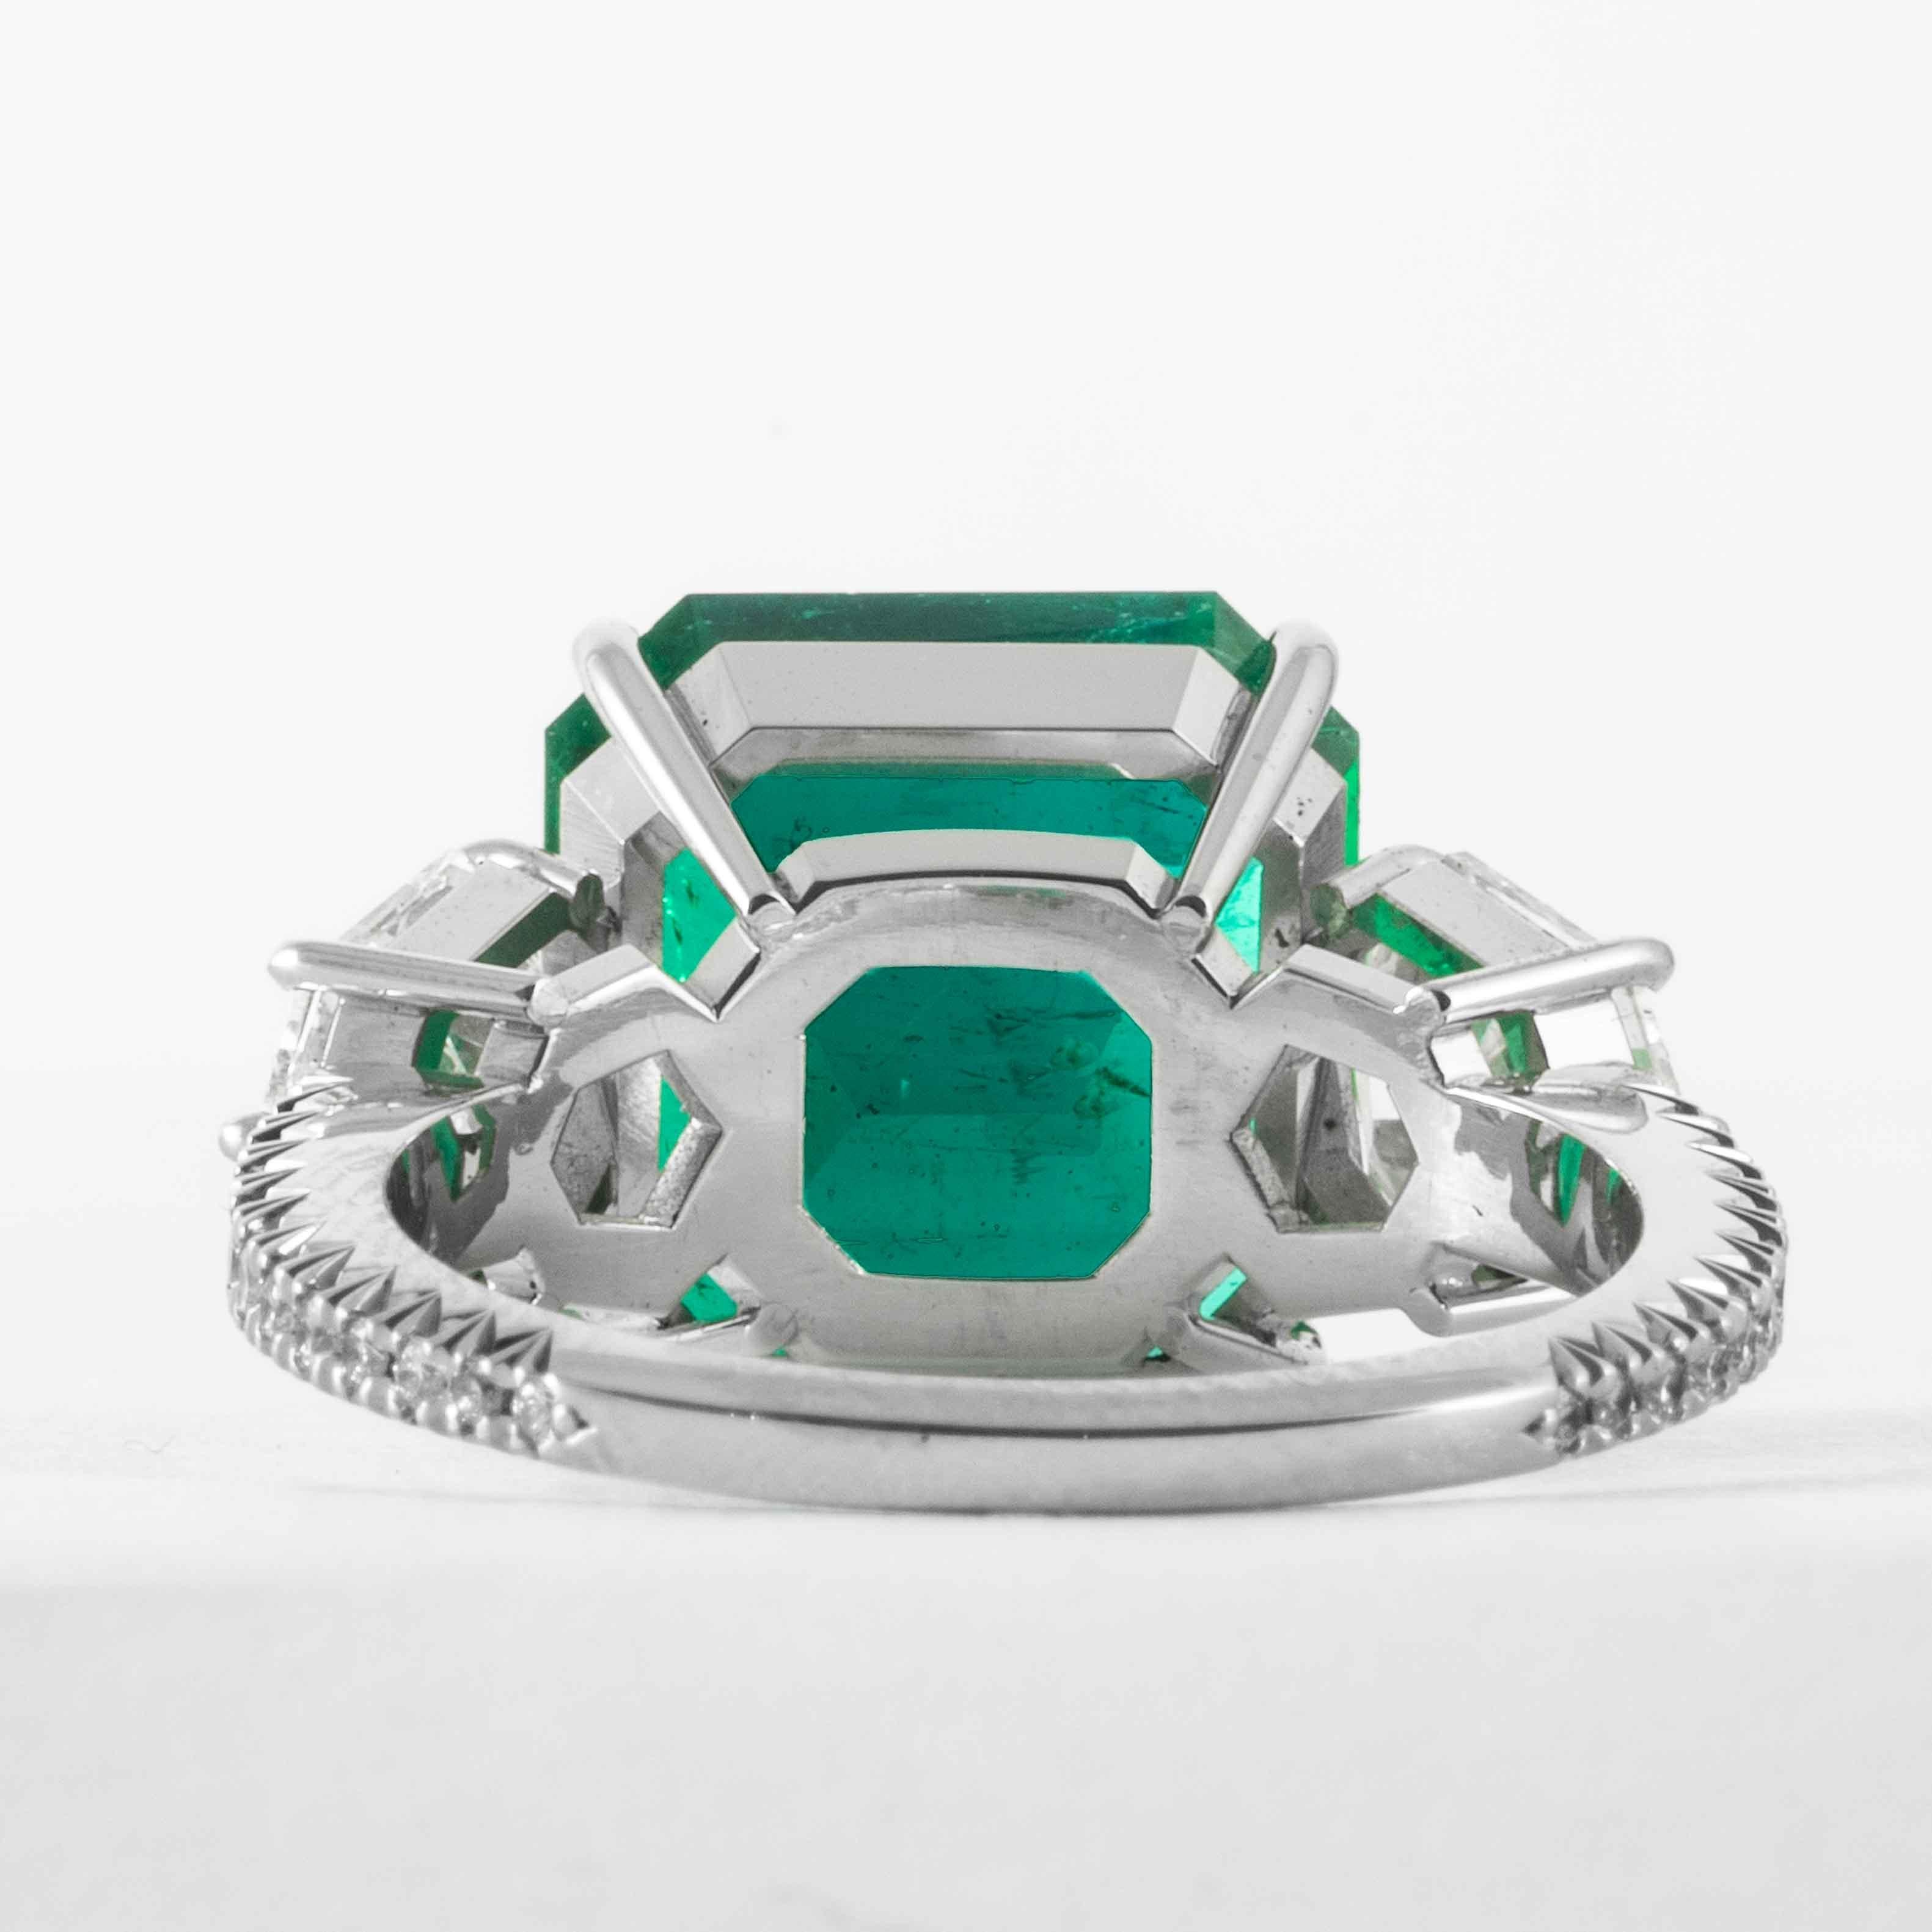 Shreve, Crump & Low 5.48 Carat Colombian Emerald and Diamond White Gold Ring For Sale 2